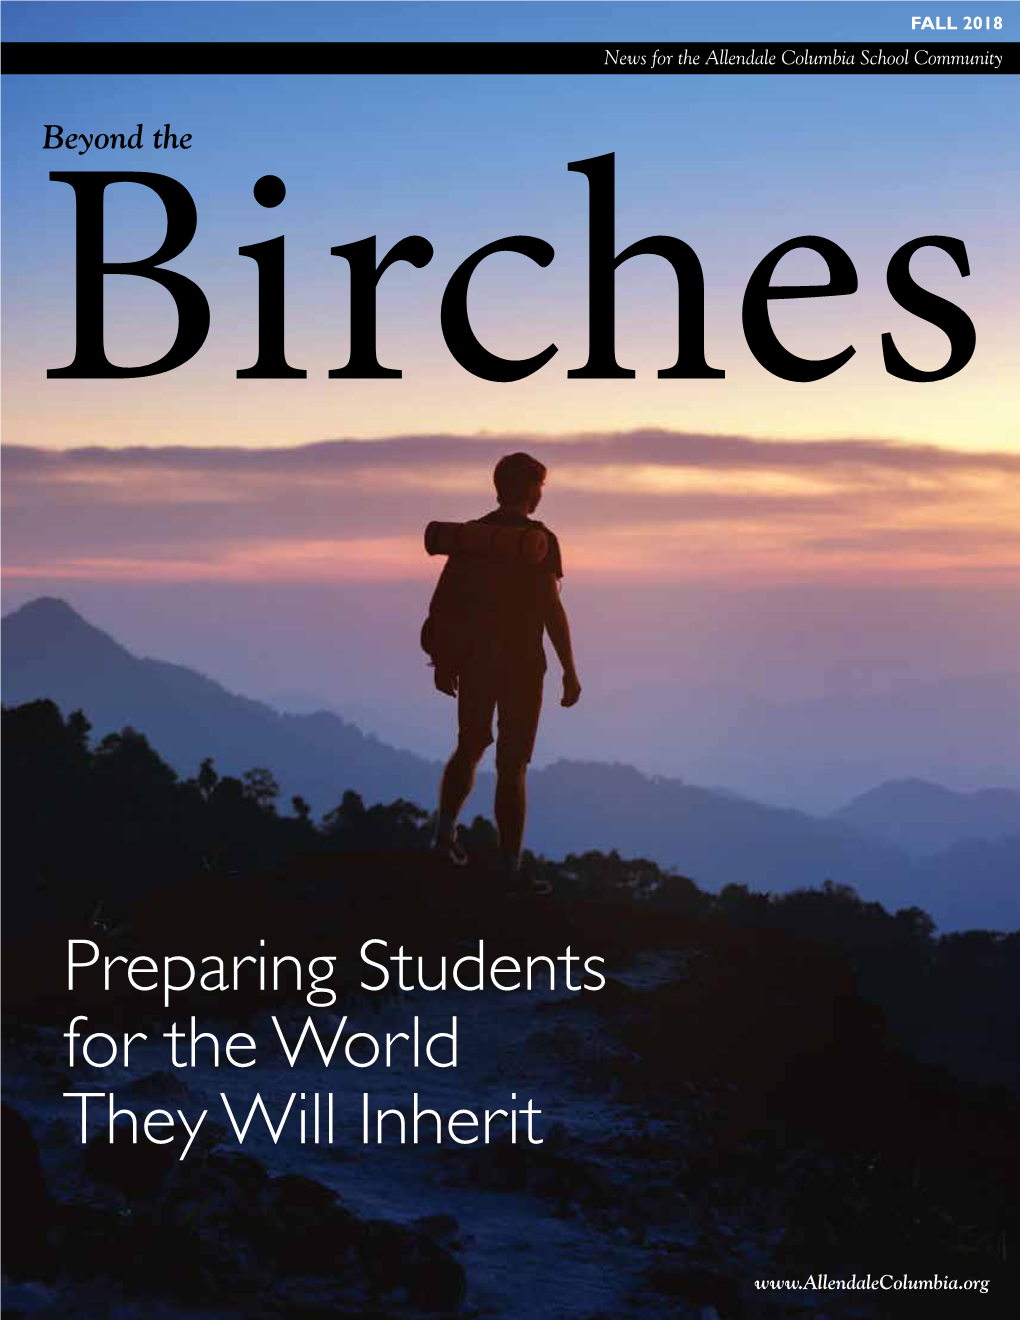 Preparing Students for the World They Will Inherit